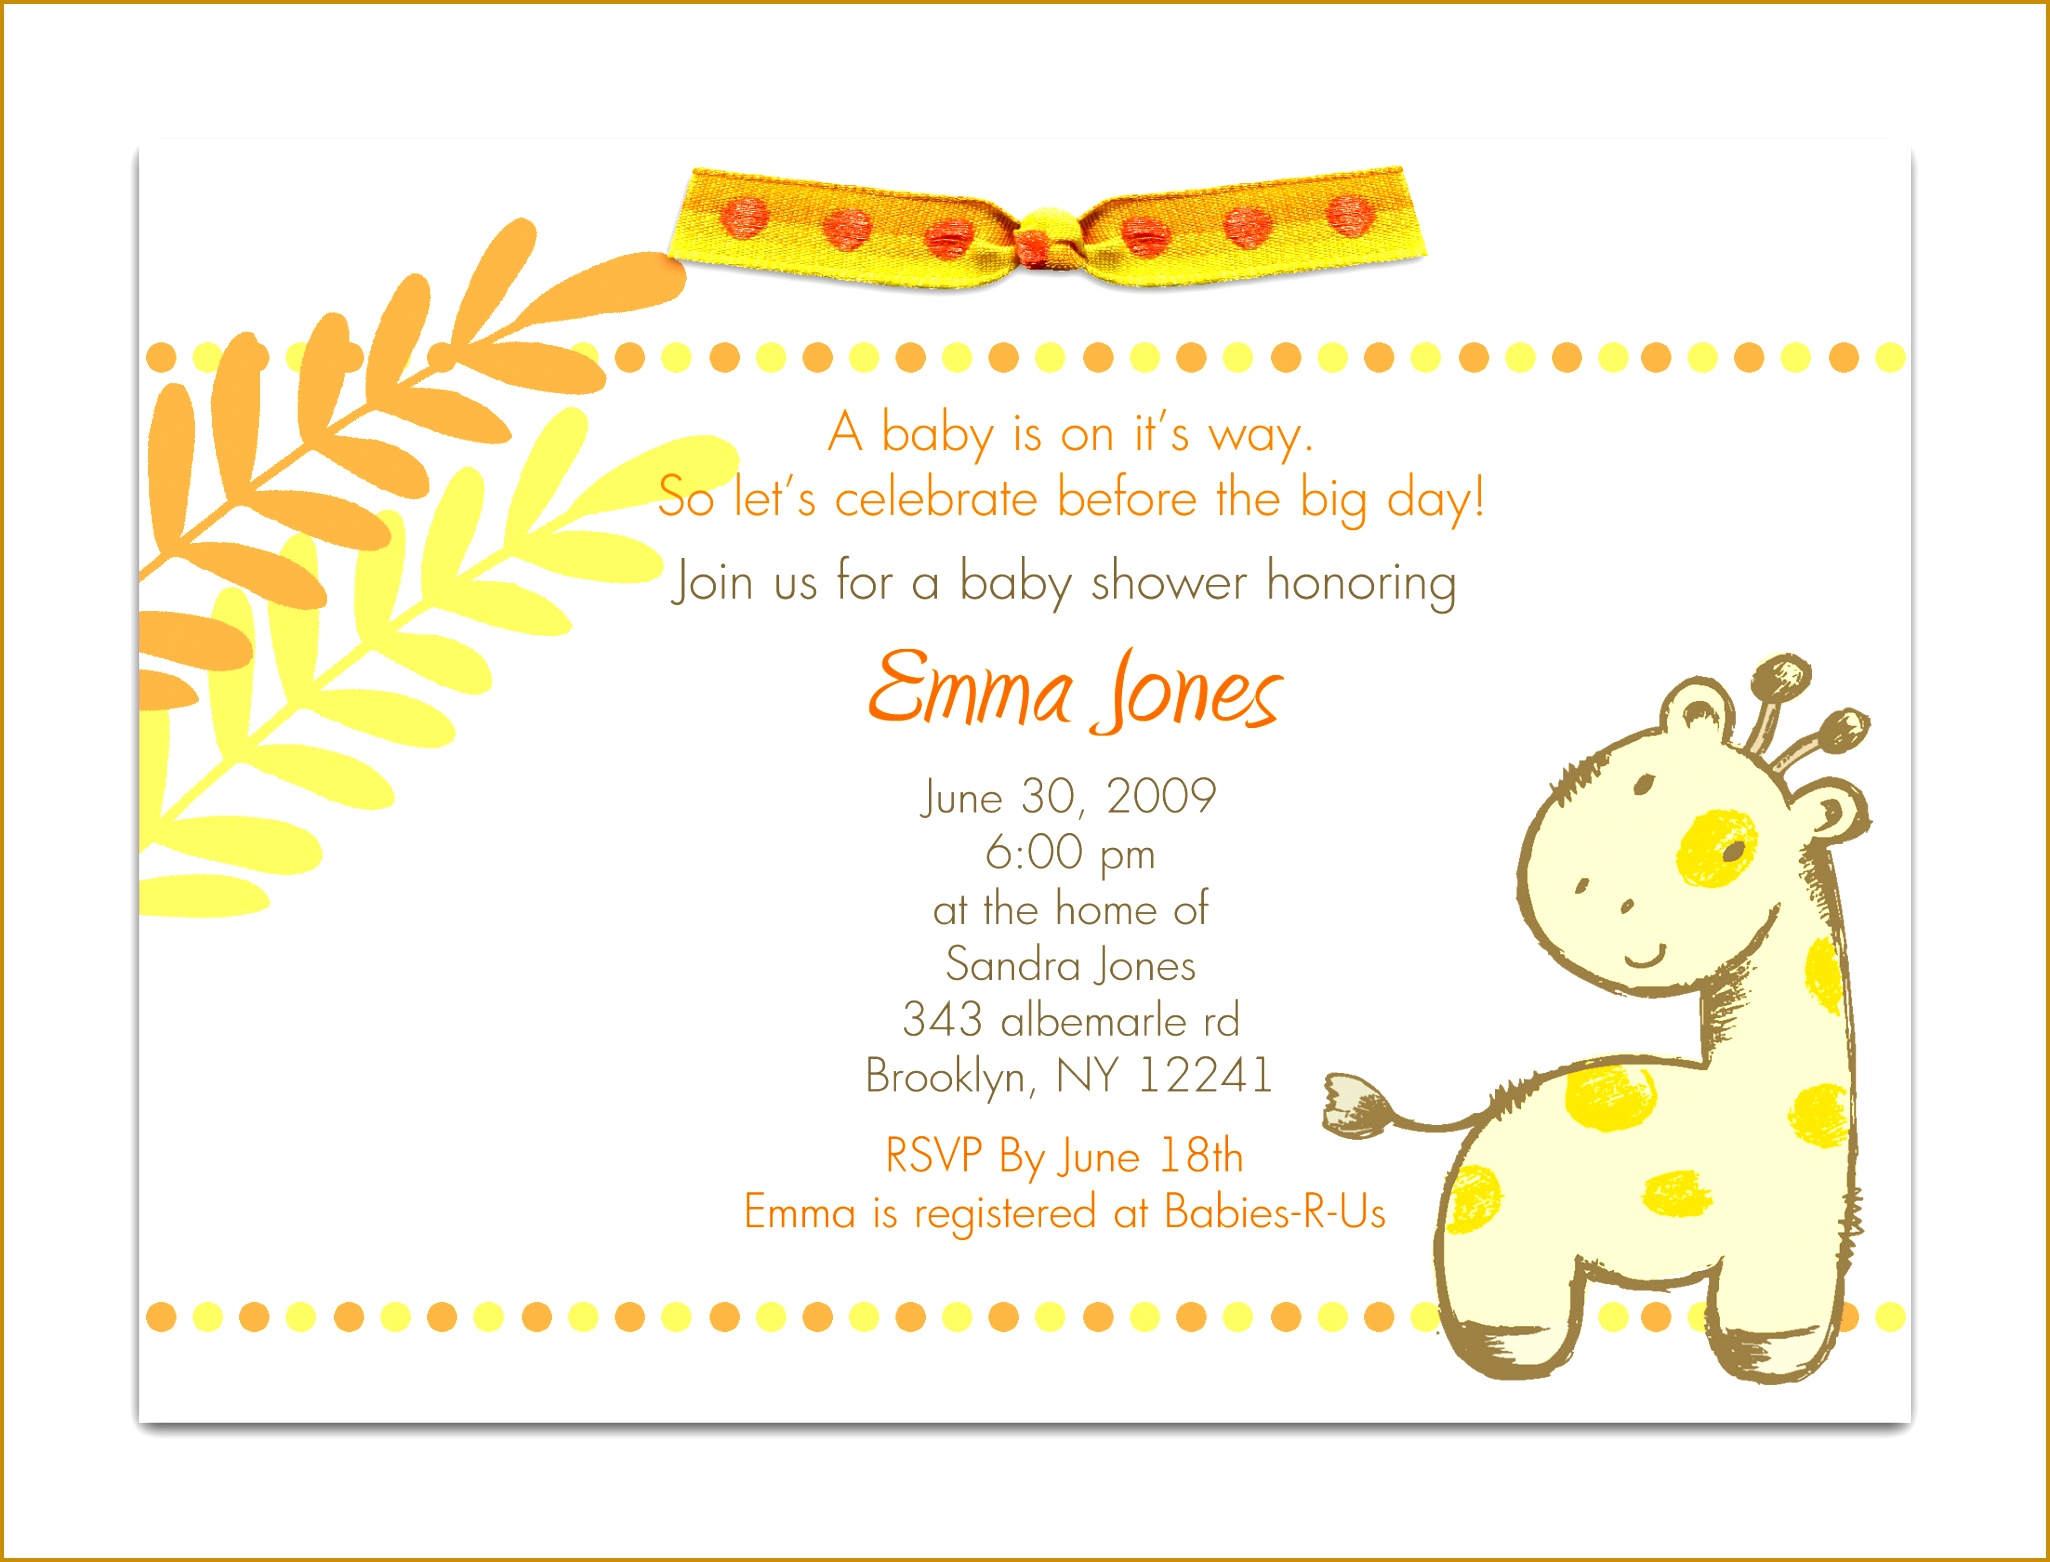 Awesome Cheap Baby Shower Invitation Cards 62 For Create Invitation Card Free Download with Cheap Baby 15622050